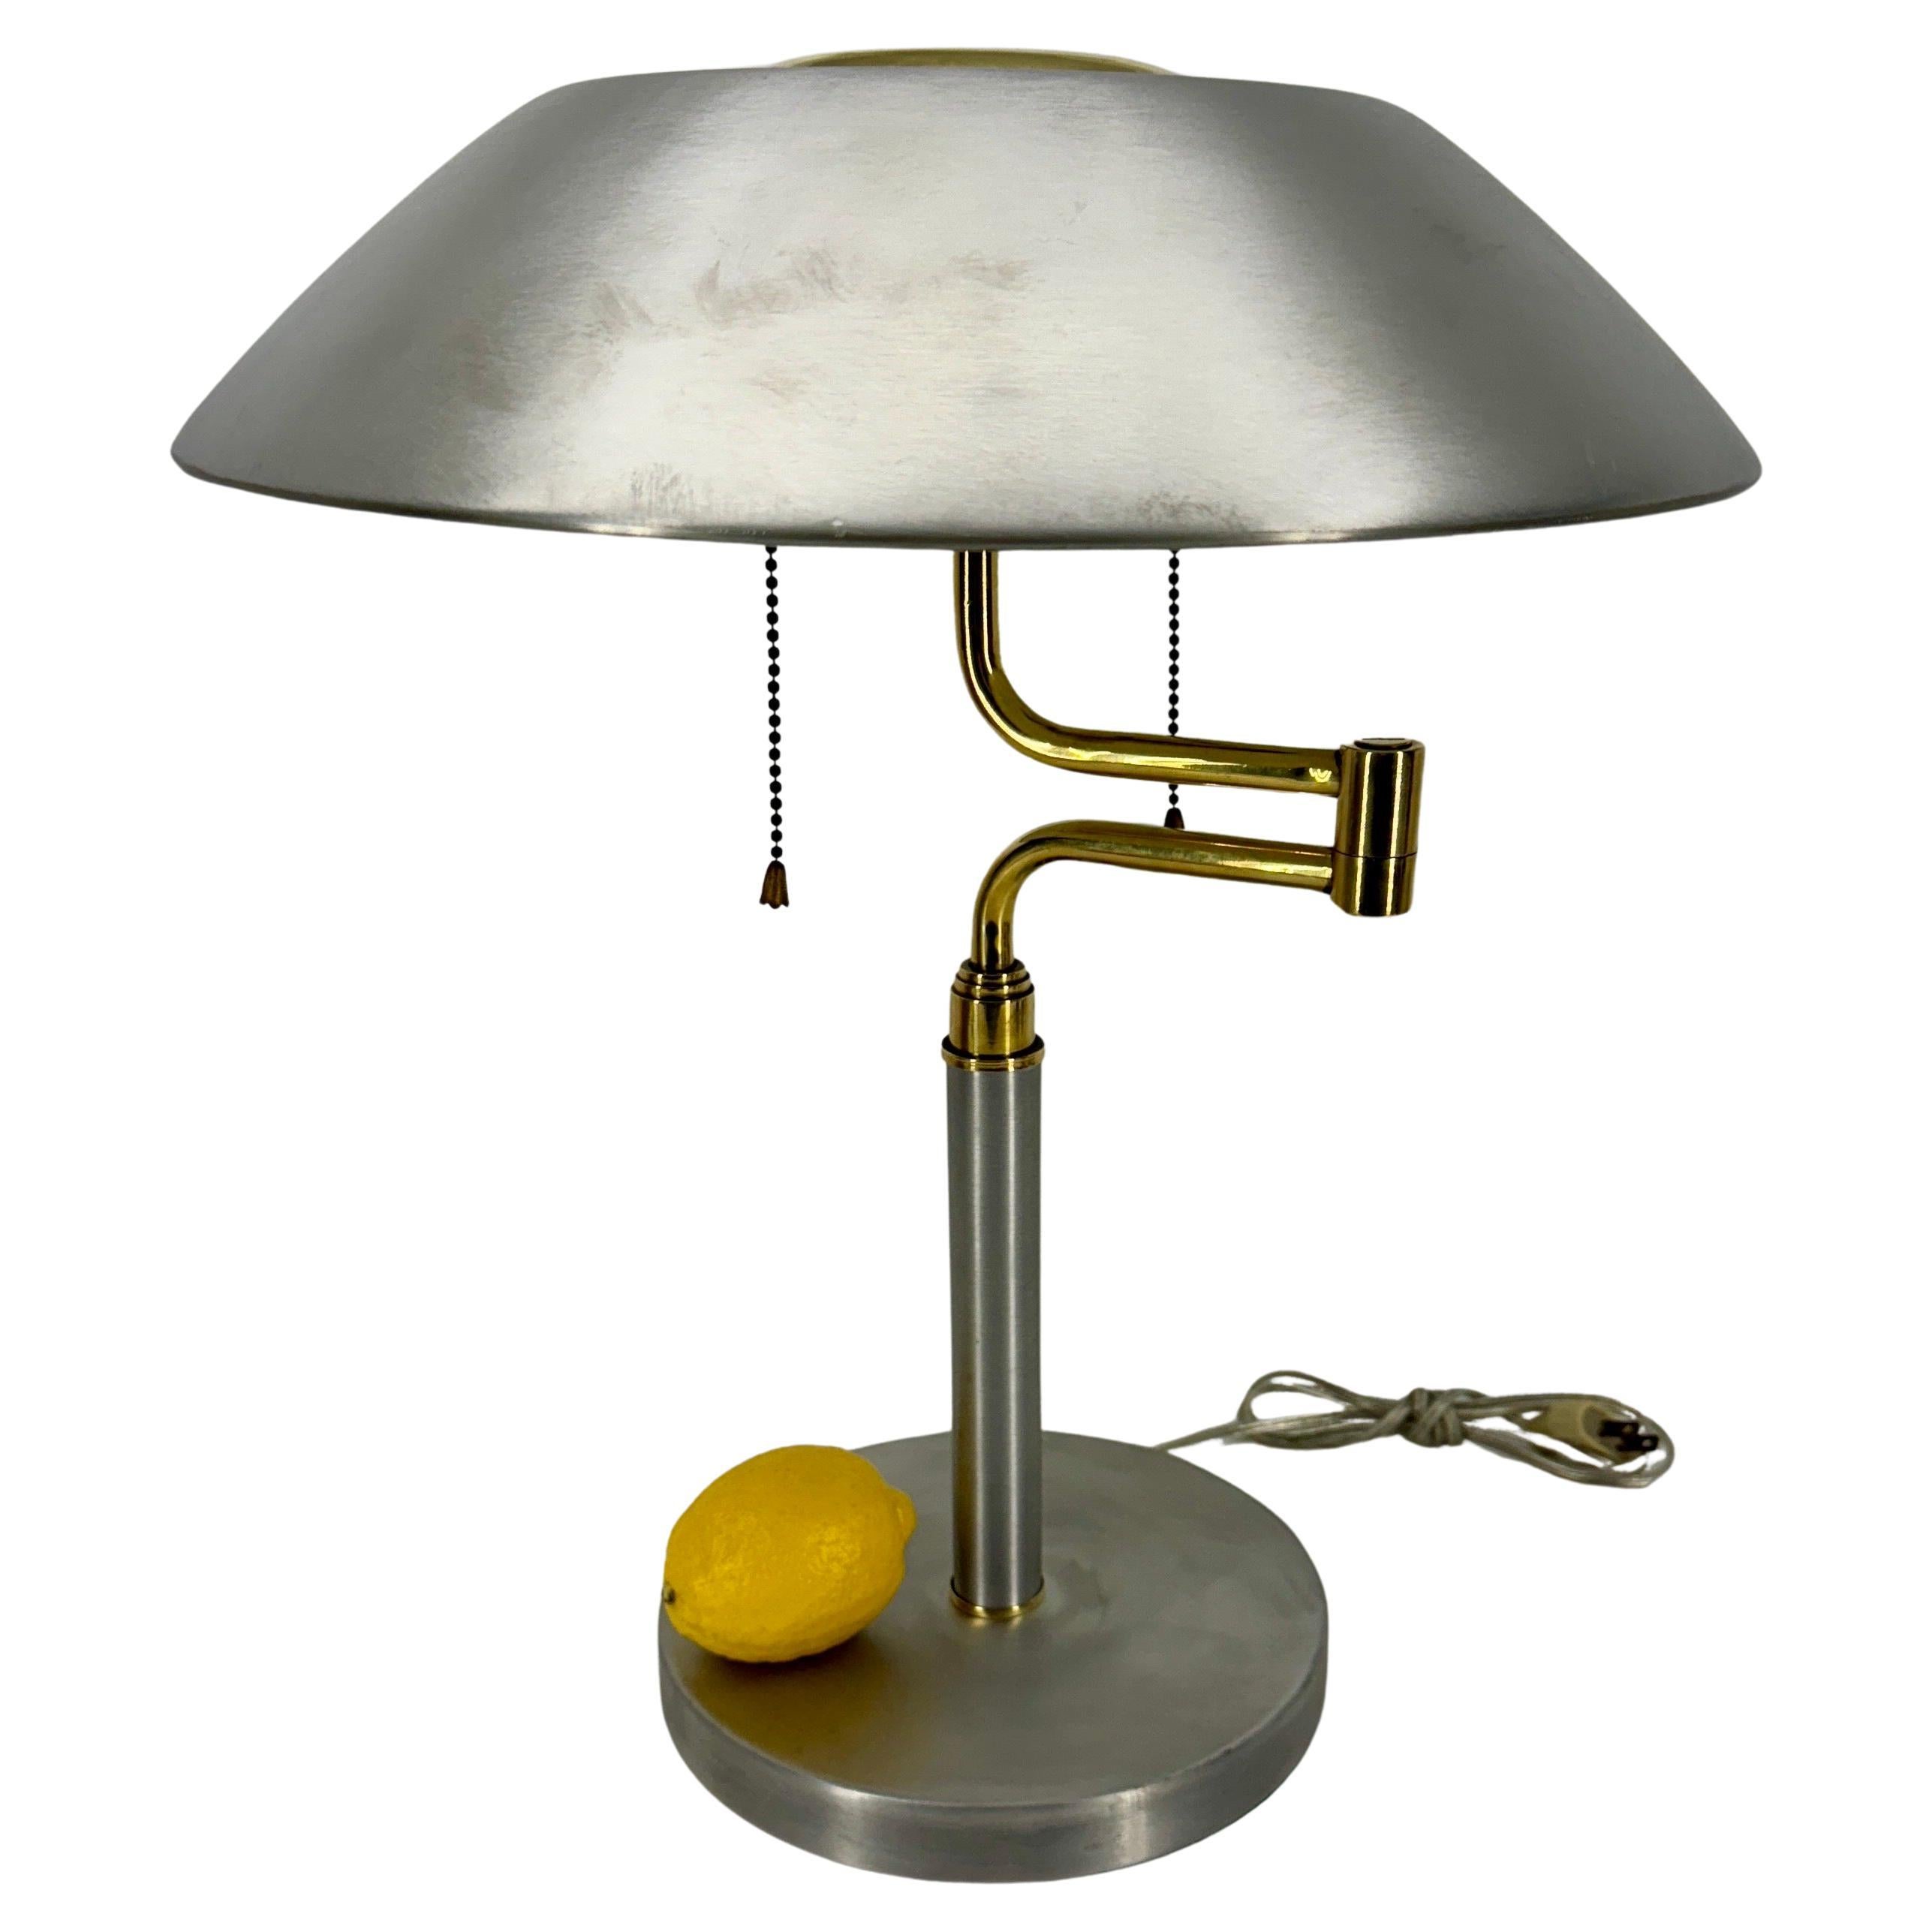 Vintage Brushed Aluminum and Brass Office Desk Lamp, Mid-Century Modern.
The arm and shade of the lamp swings out to a total max lamp width of 20,75 inches.